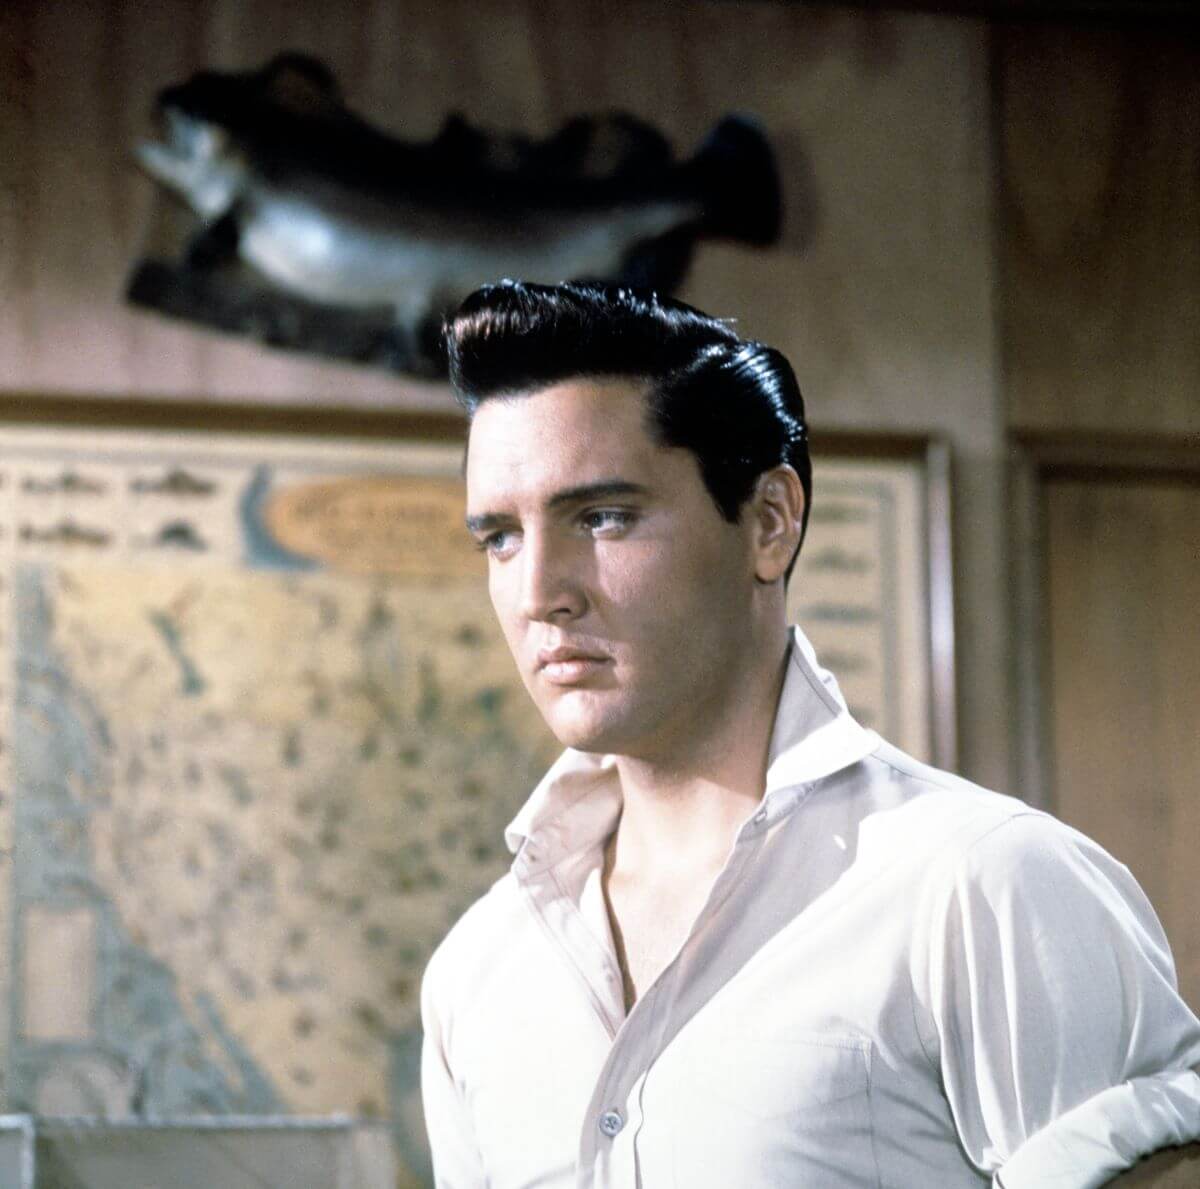 Elvis Presley wears a white shirt and stands in front of a map in the film 'Girls! Girls! Girls!'